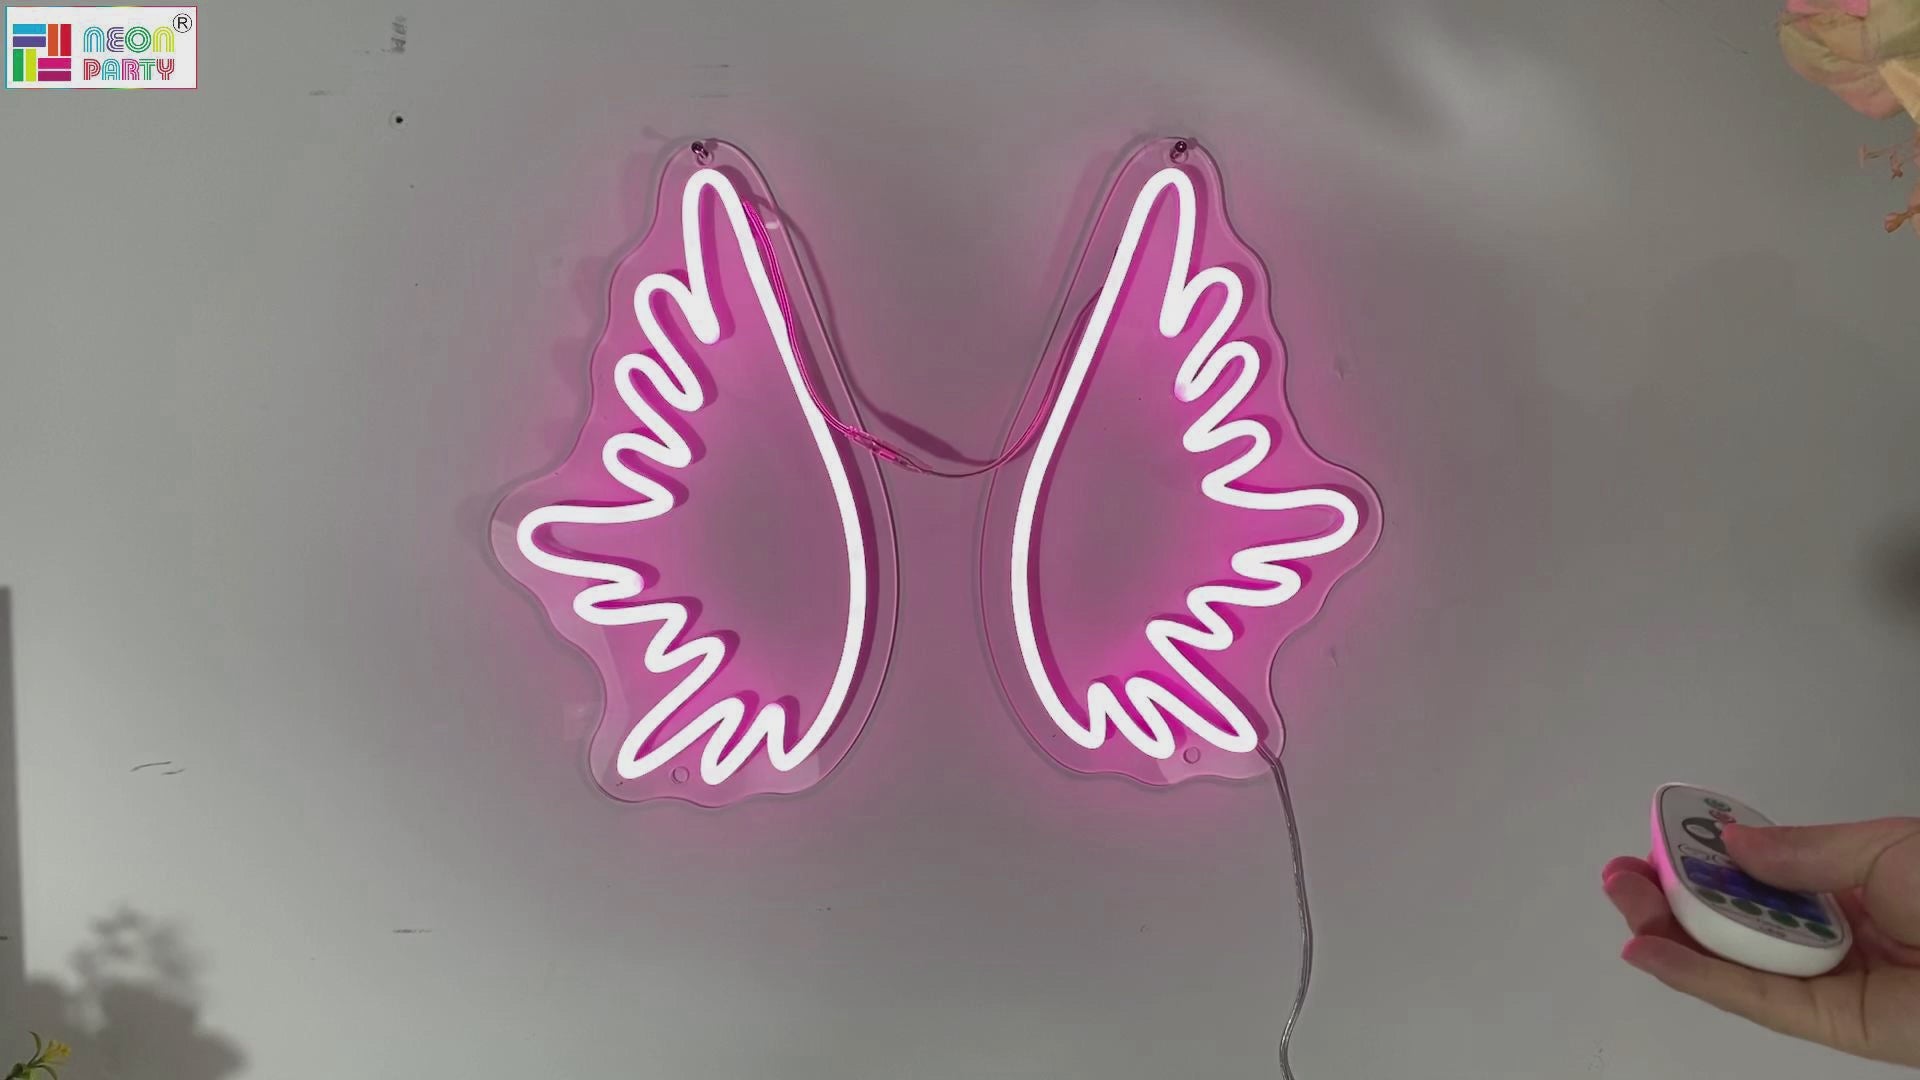 Angelic Wings Led Signs